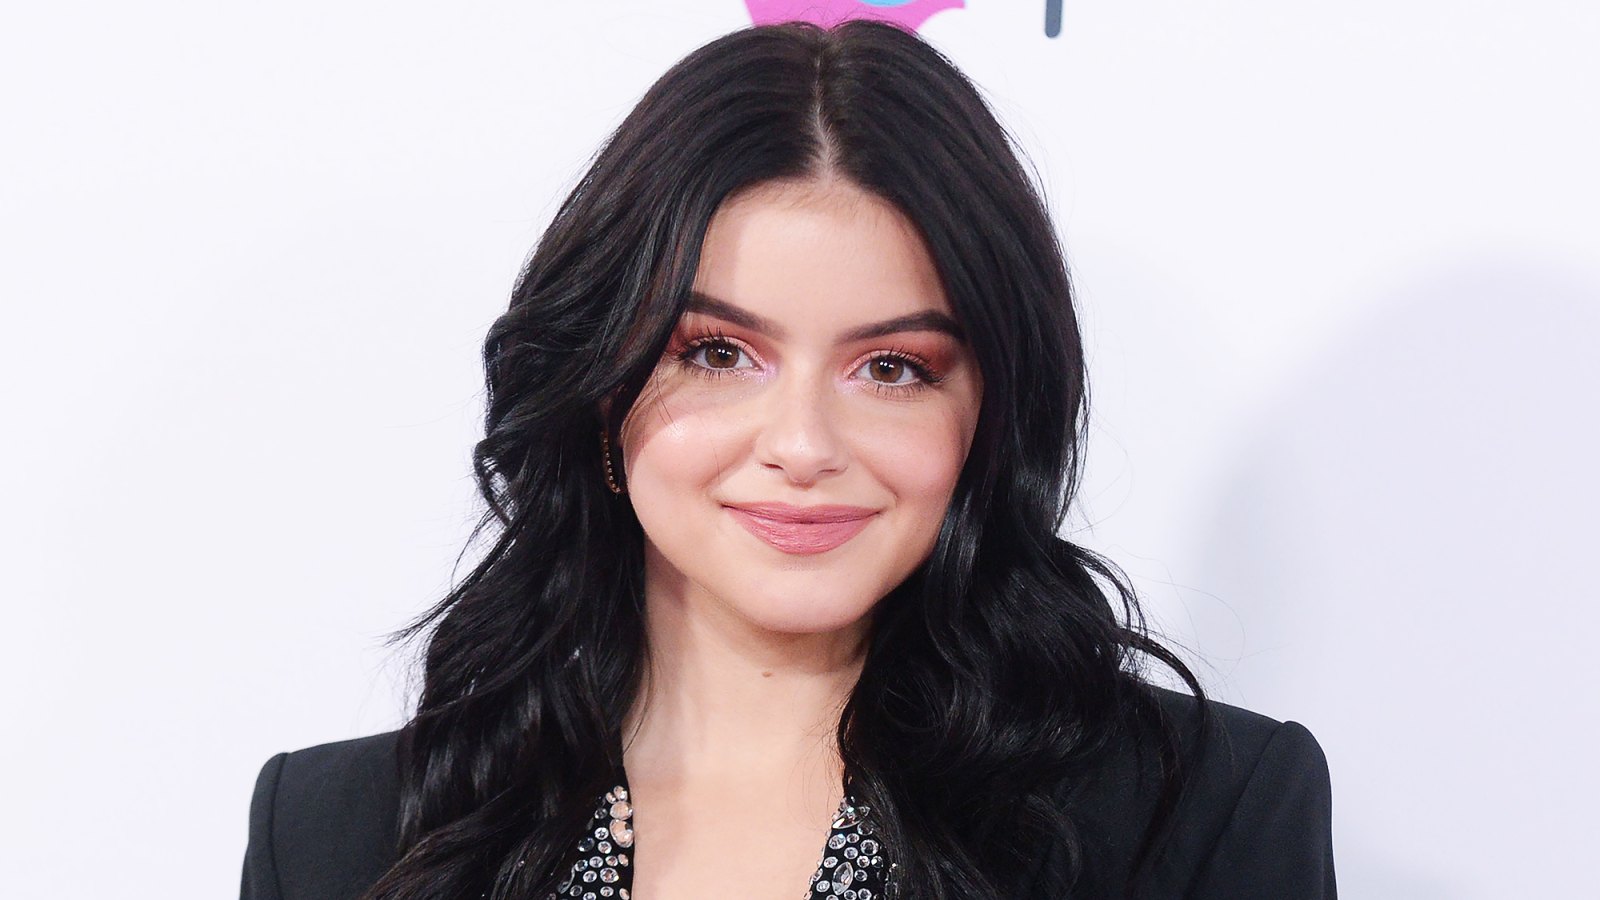 Ariel Winter Cut Part of Her Thumb Off While Cooking 2